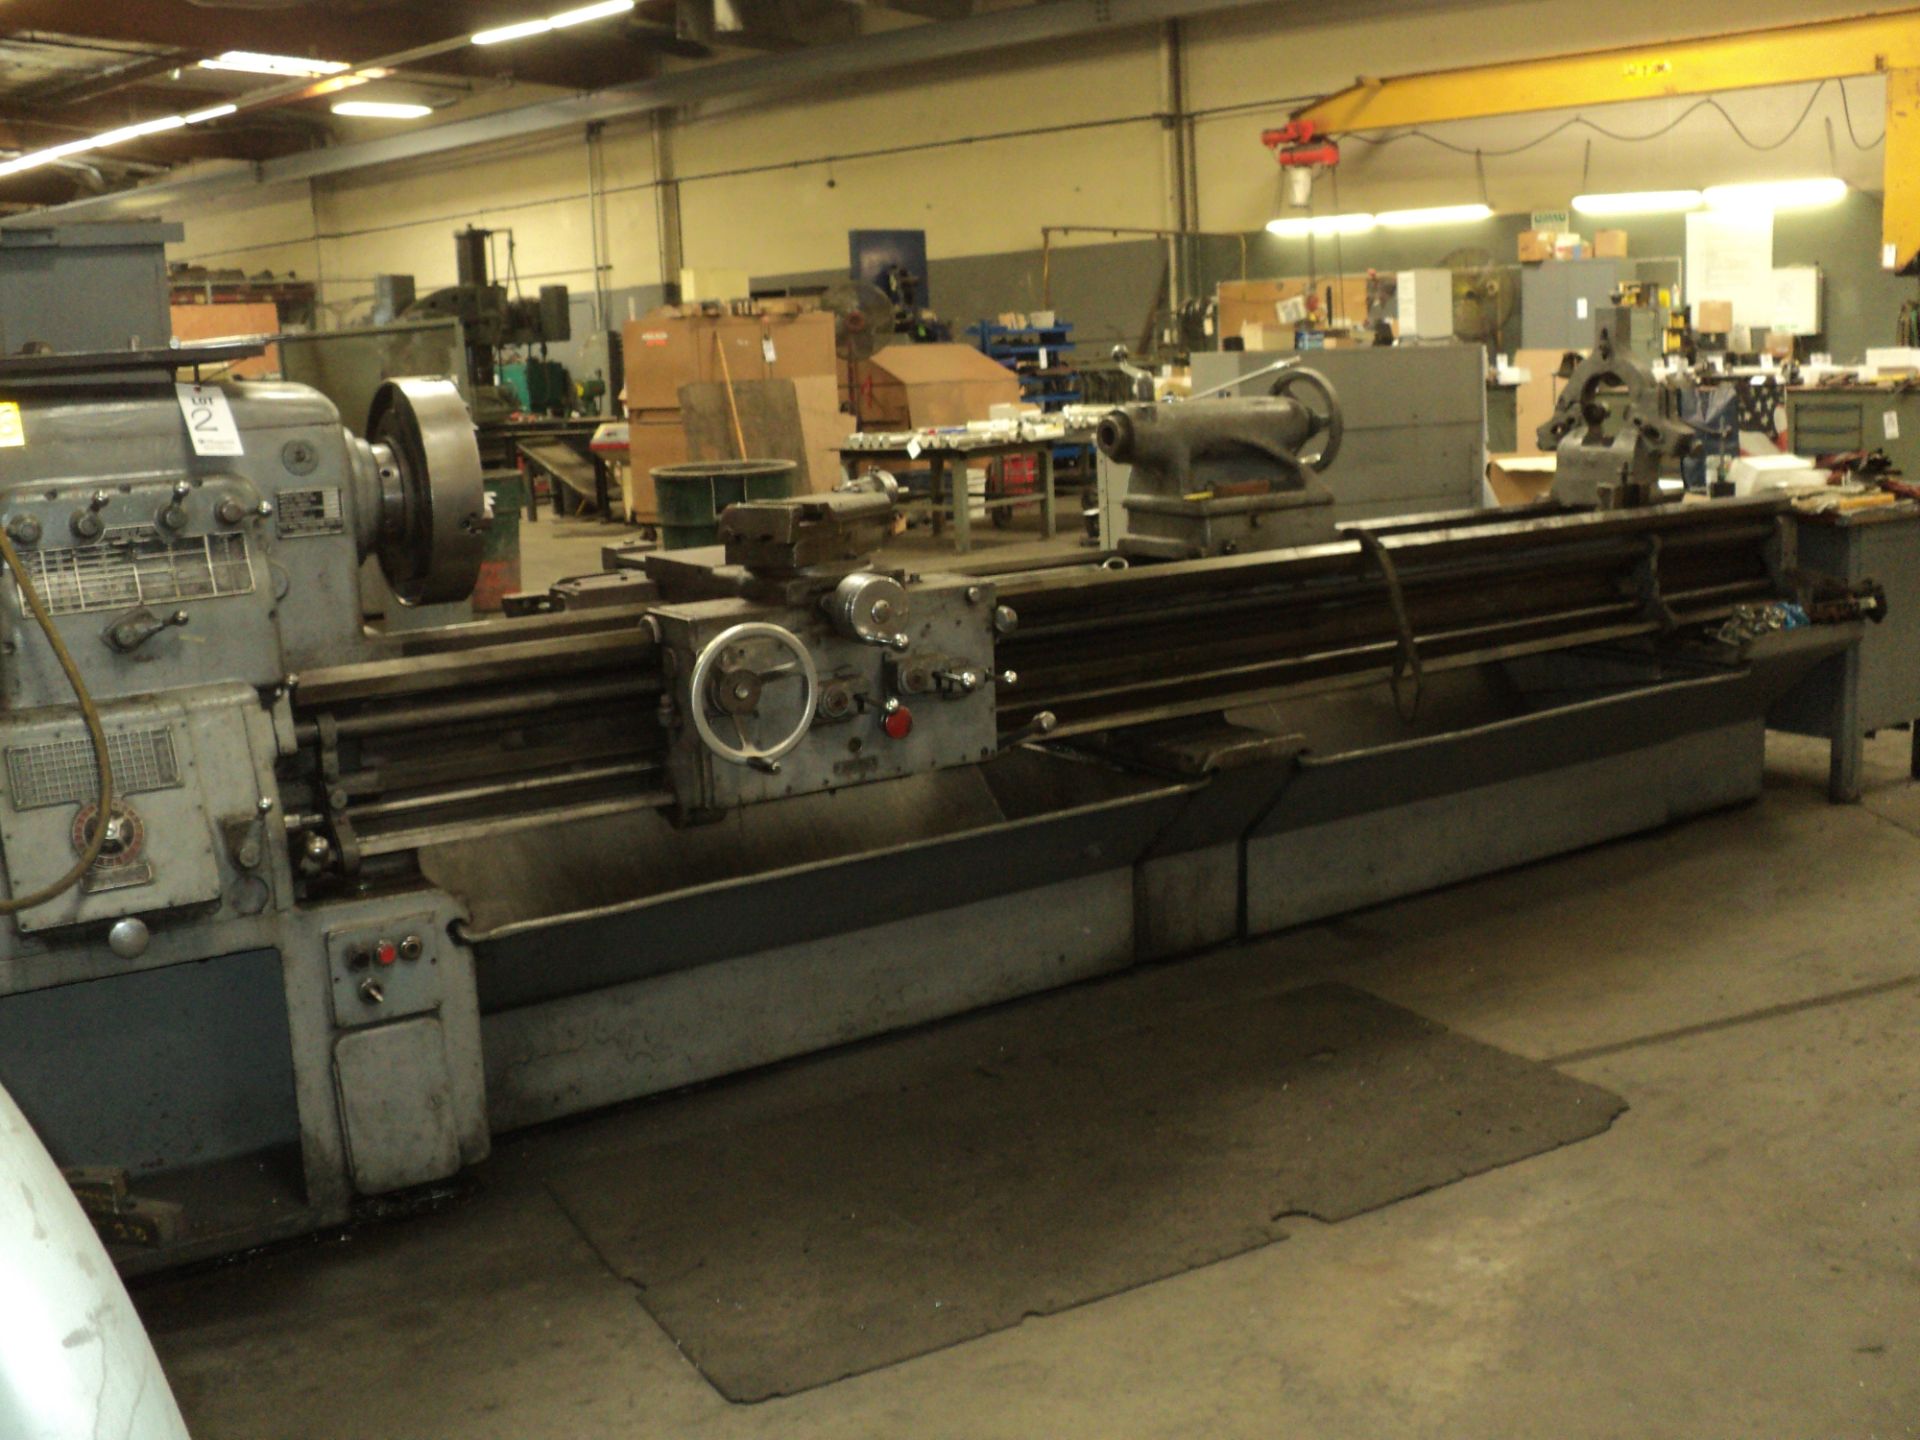 MONARCH ENGINE LATHE, 20" x 120" CCS, 12" 3 JAW CHUCK, TAILSTOCK, CROSS SLIDE, STEADY REST, TRACER